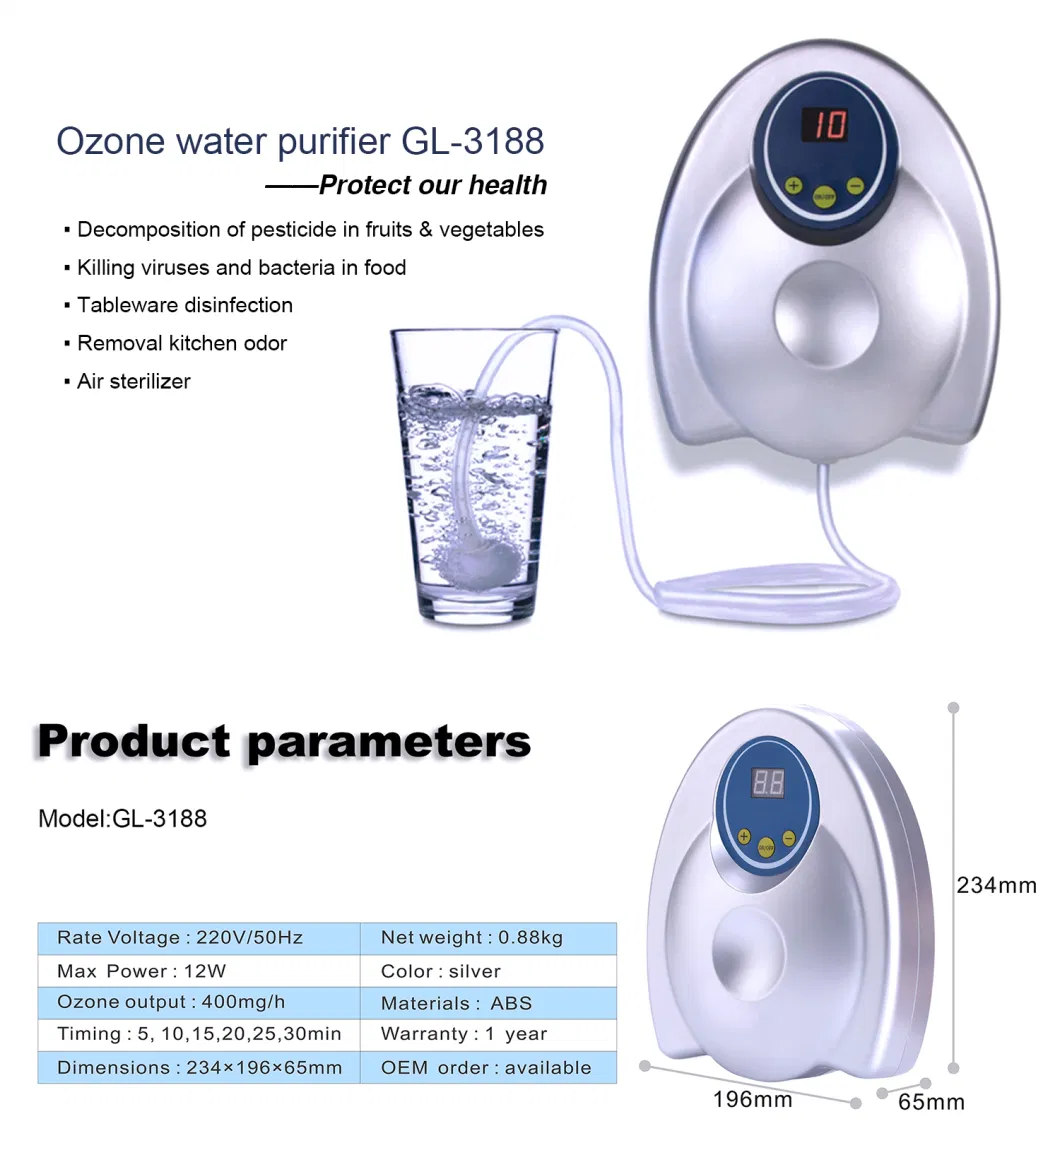 Wall Mounted 400mg/H Ozone Food Disinfection Sterilizer Portable Vegetable Cleaner Machine